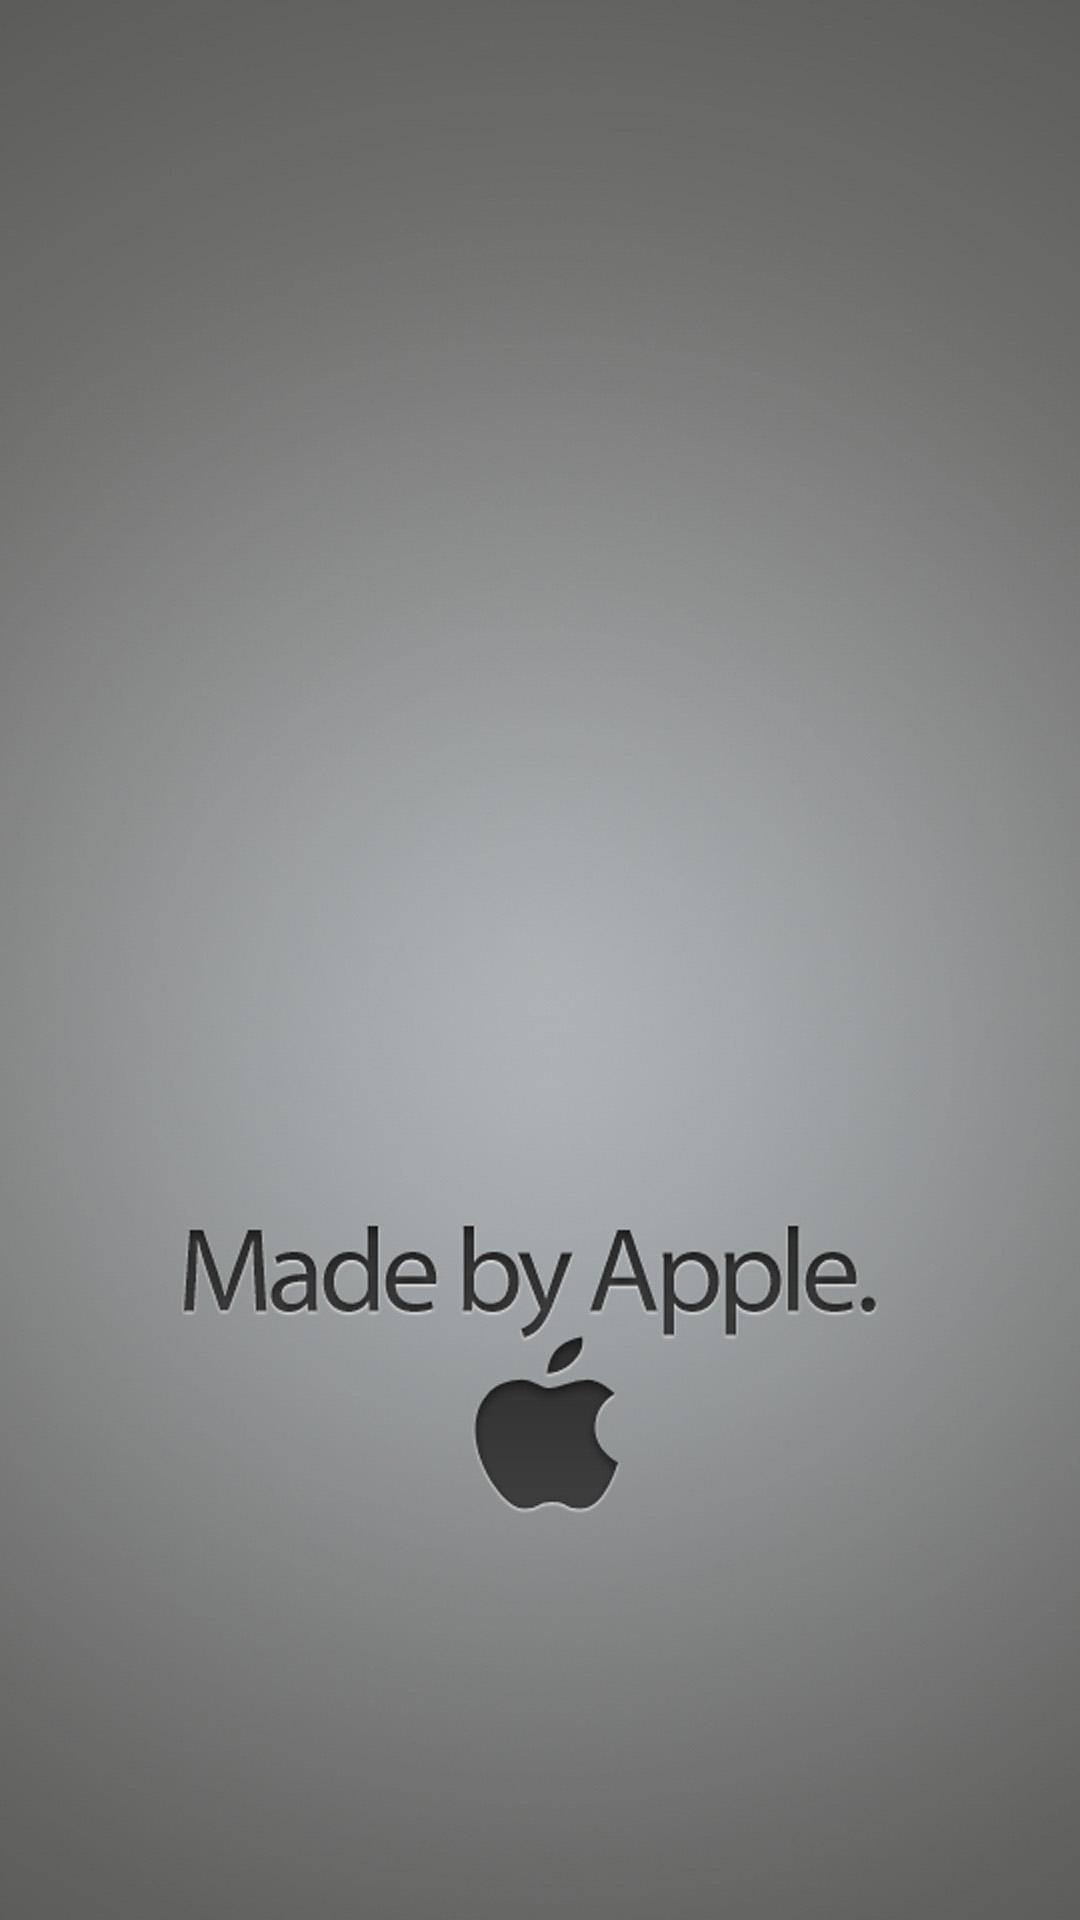 Made by apple HD Wallpaper iPhone 6 plus